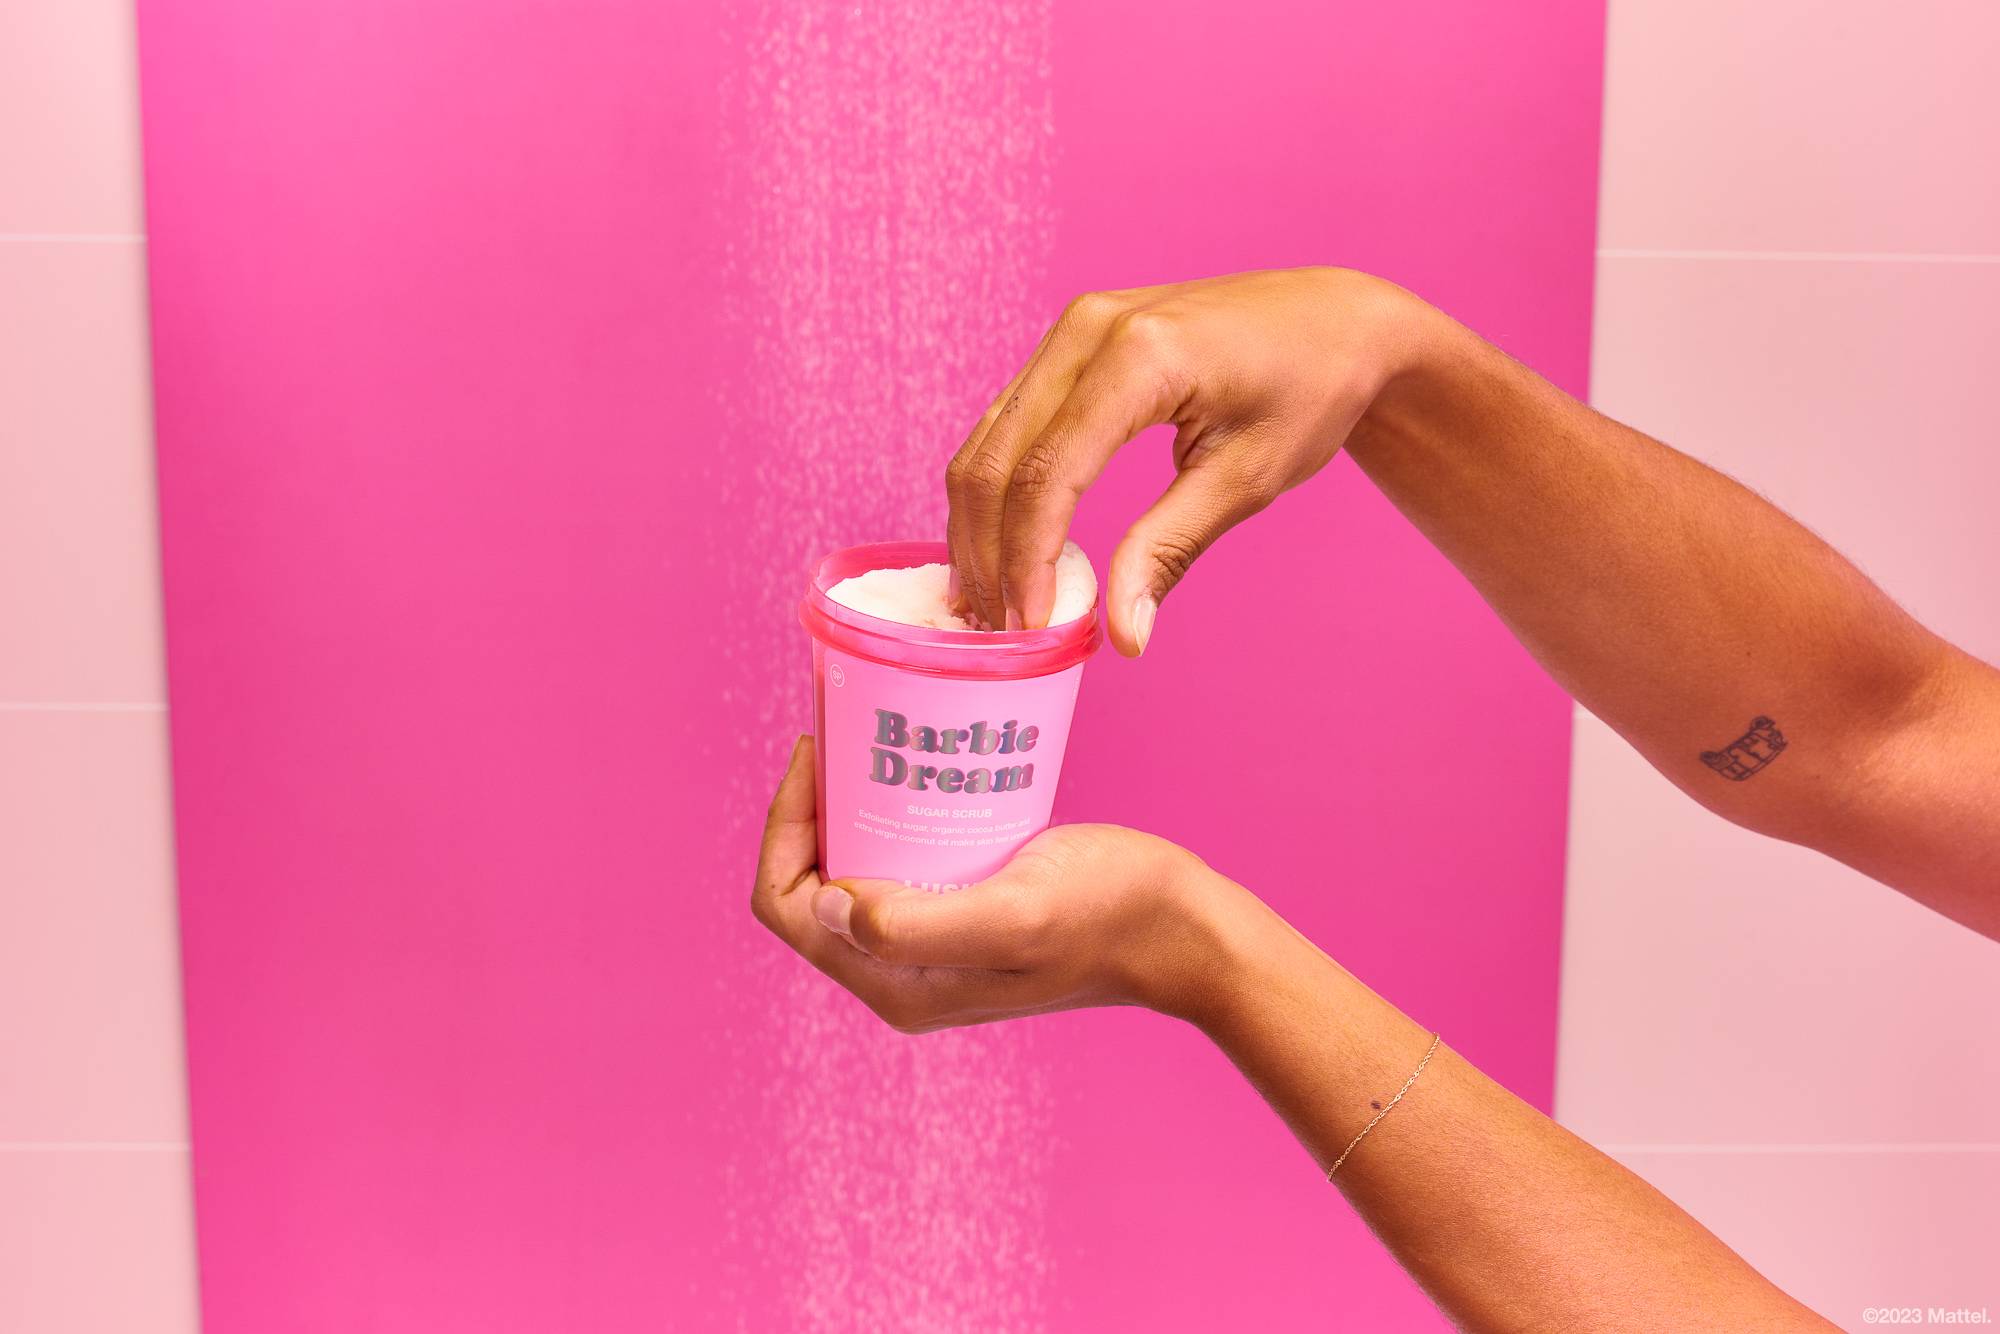 Model is in a pink shower, scooping out the Barbie Dream product from a pink LUSH "bring it back" pot as the water runs behind.
